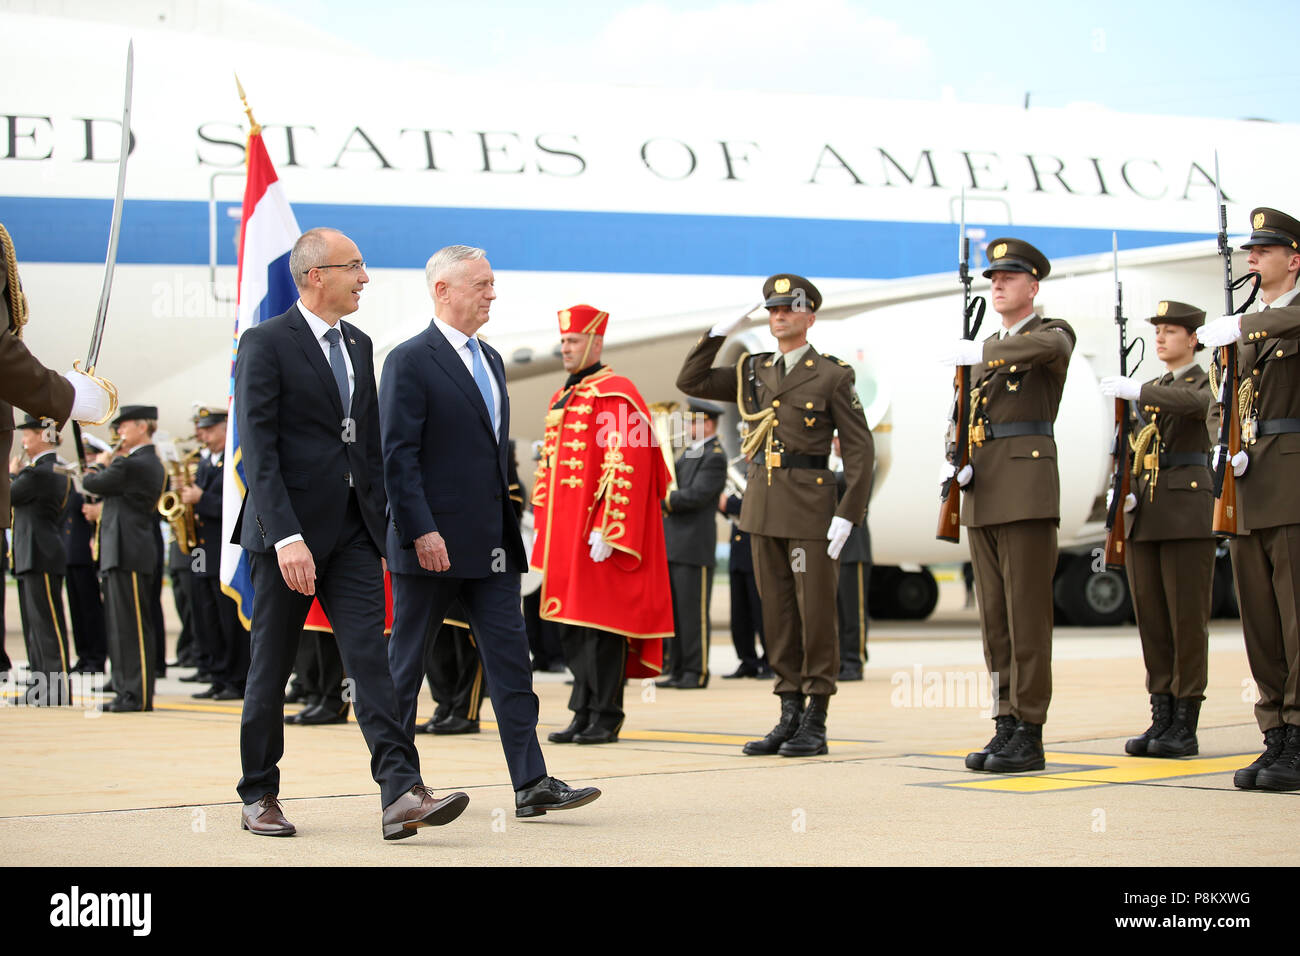 Zagreb, Croatia. 12th July, 2018. Croatian Defense Minister Damir Krsticevic (L, front) and visiting U.S. Secretary of Defense James Mattis (R, front) inspect guard of honor in Zagreb, Croatia, on July 12, 2018. James Mattis on Thursday promised to assist in modernizing Croatian armed forces. Credit: Petar Glebov/Xinhua/Alamy Live News Stock Photo